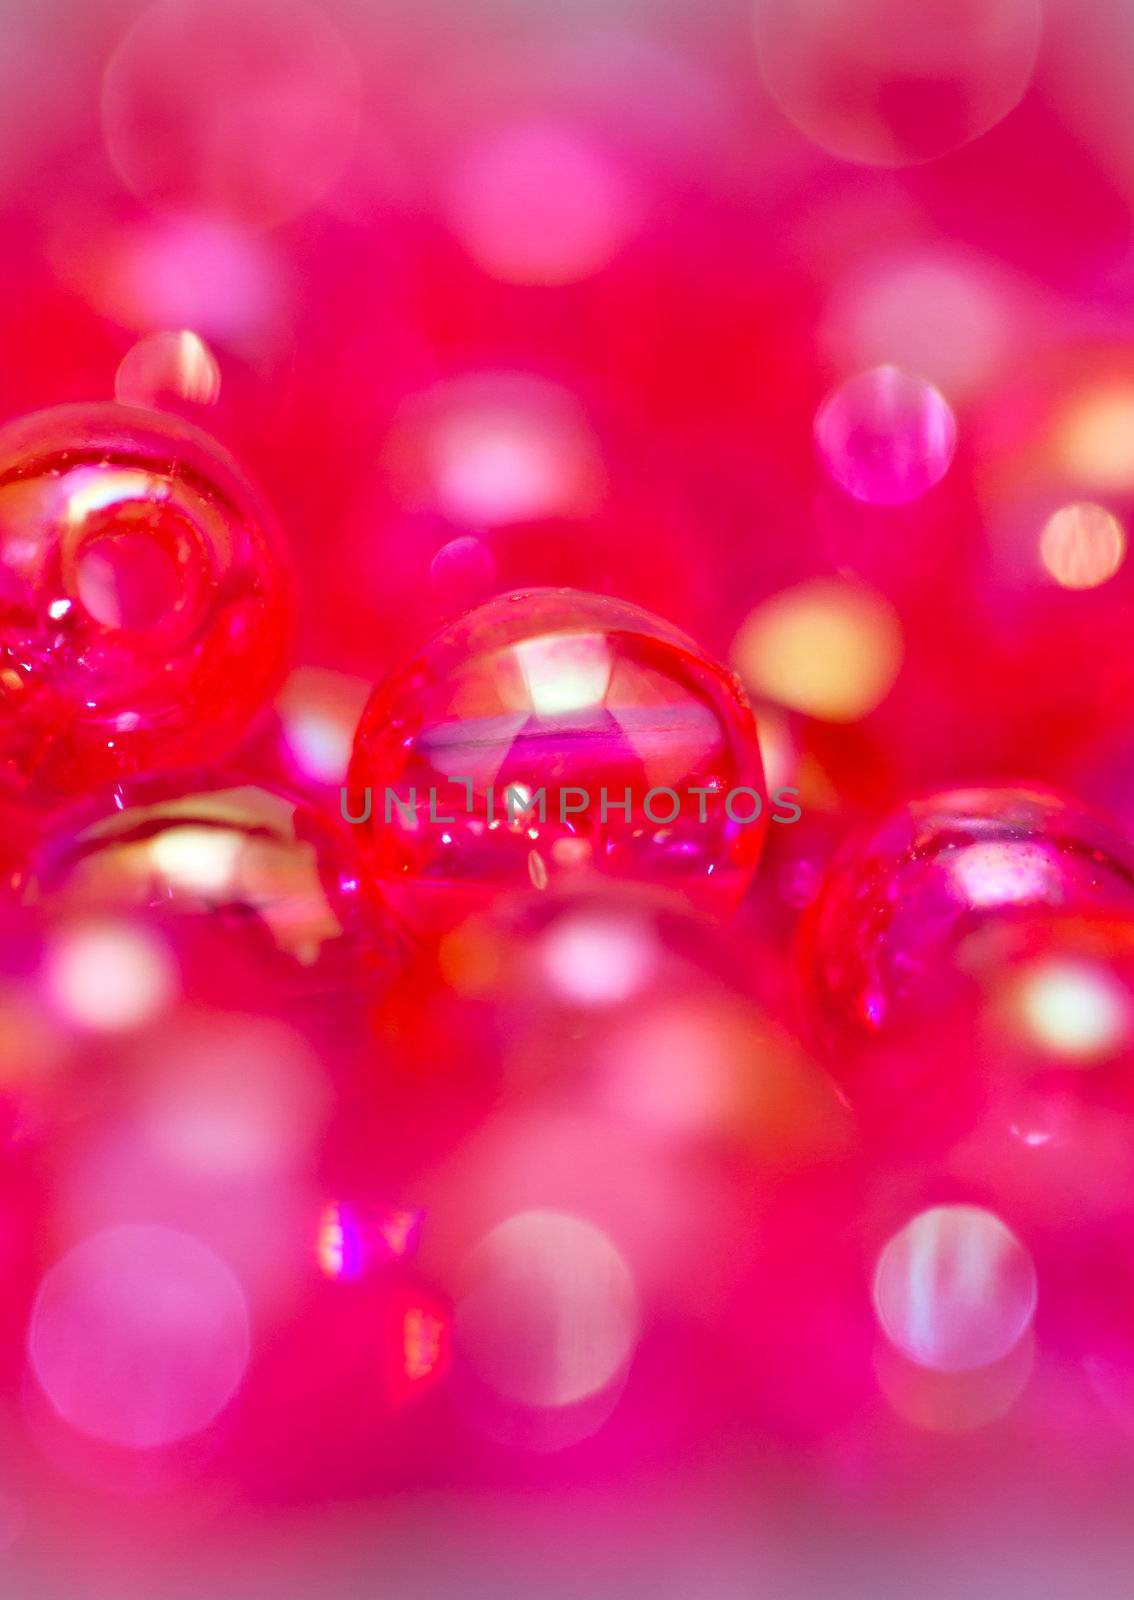 red beads abstract background in close up view portrait orientation